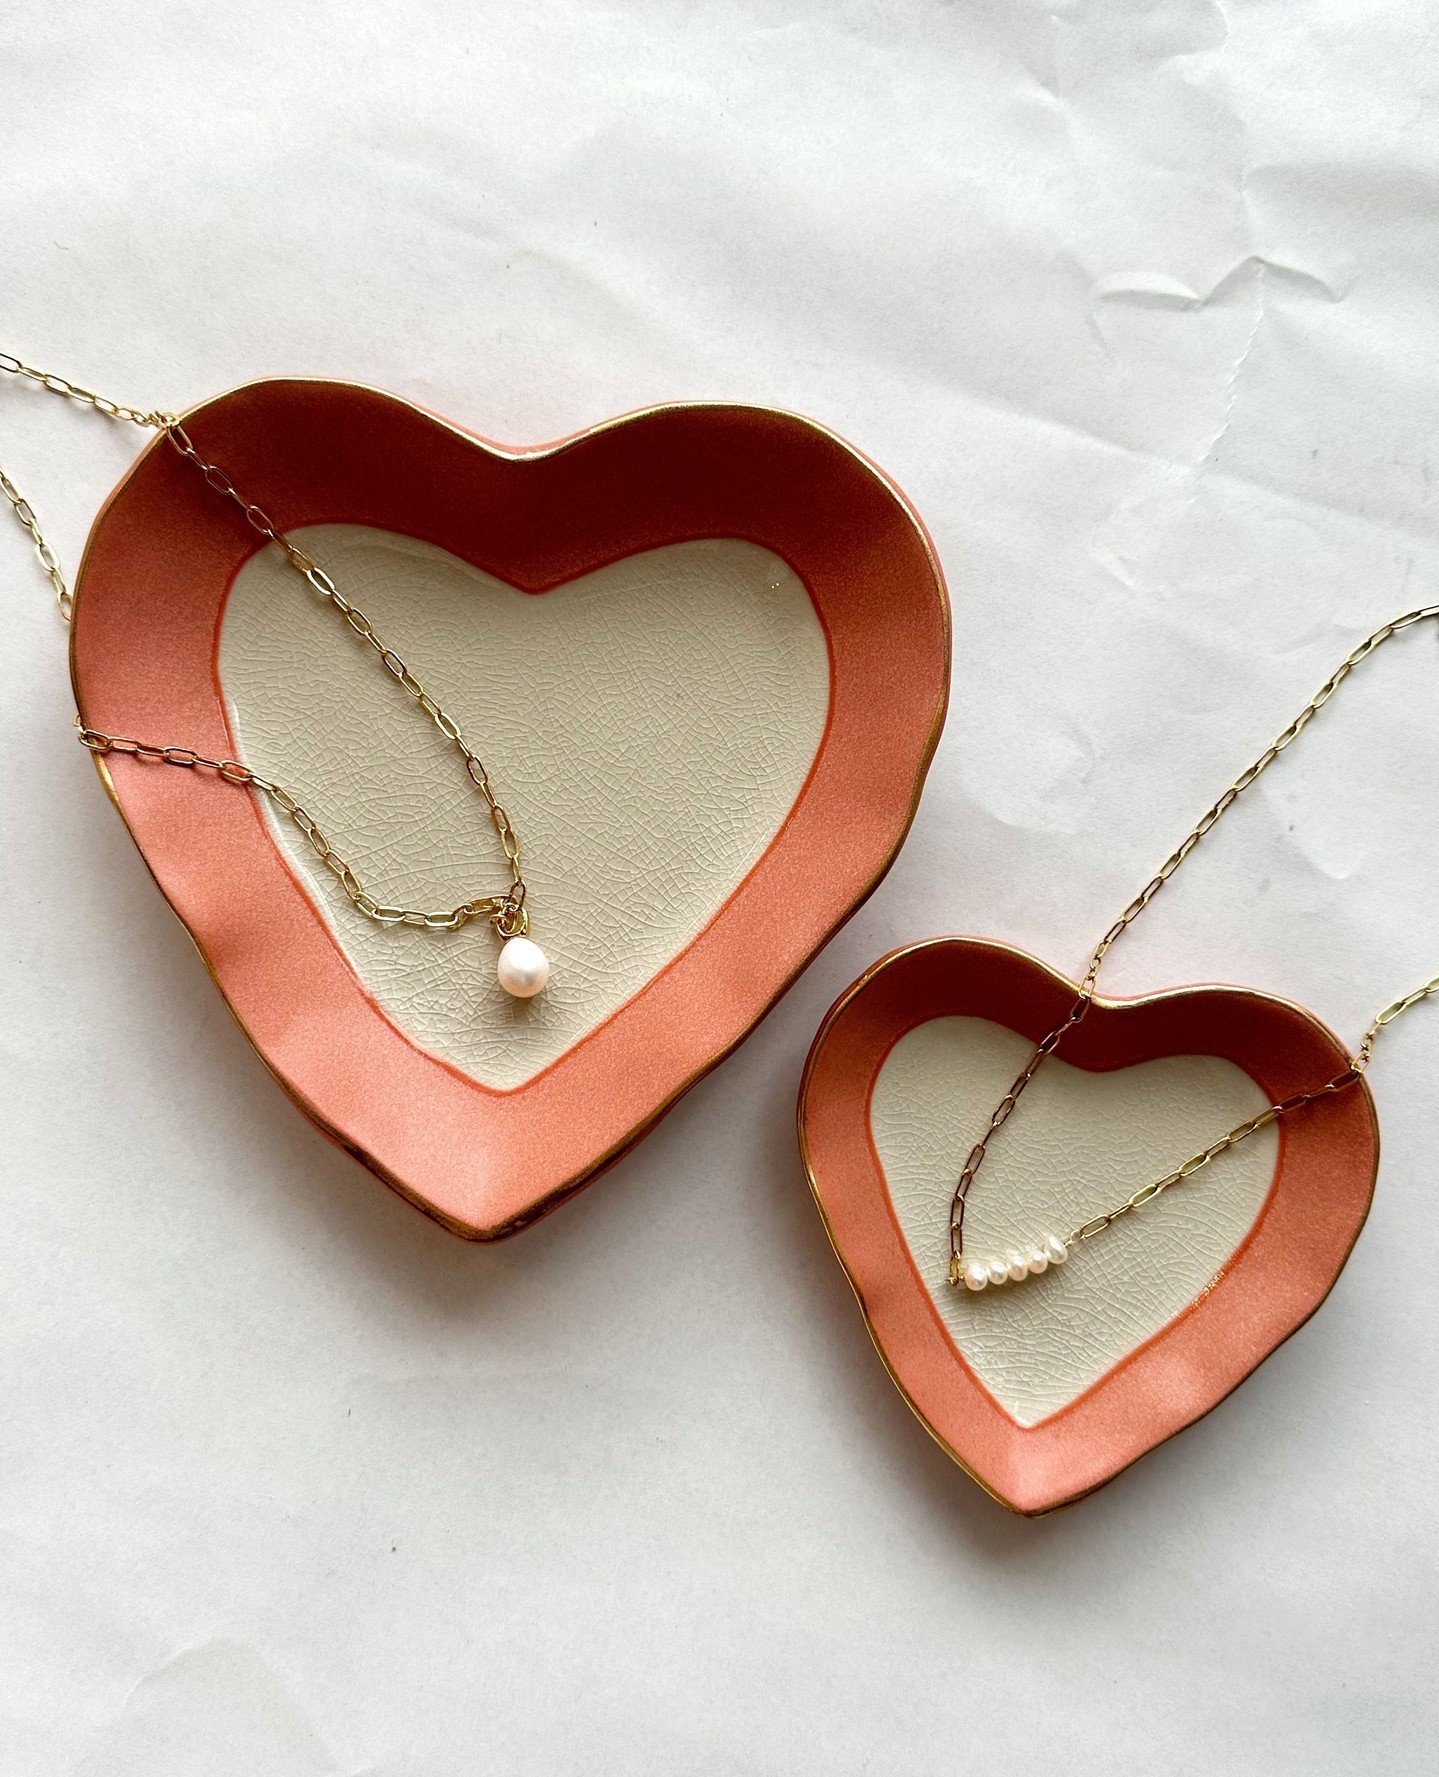 Heart eyes for @inspiredesigns pearl necklaces and the cutest jewelry dishes 💗 Send us a DM if you're interested in purchasing the heart shaped catch-alls!